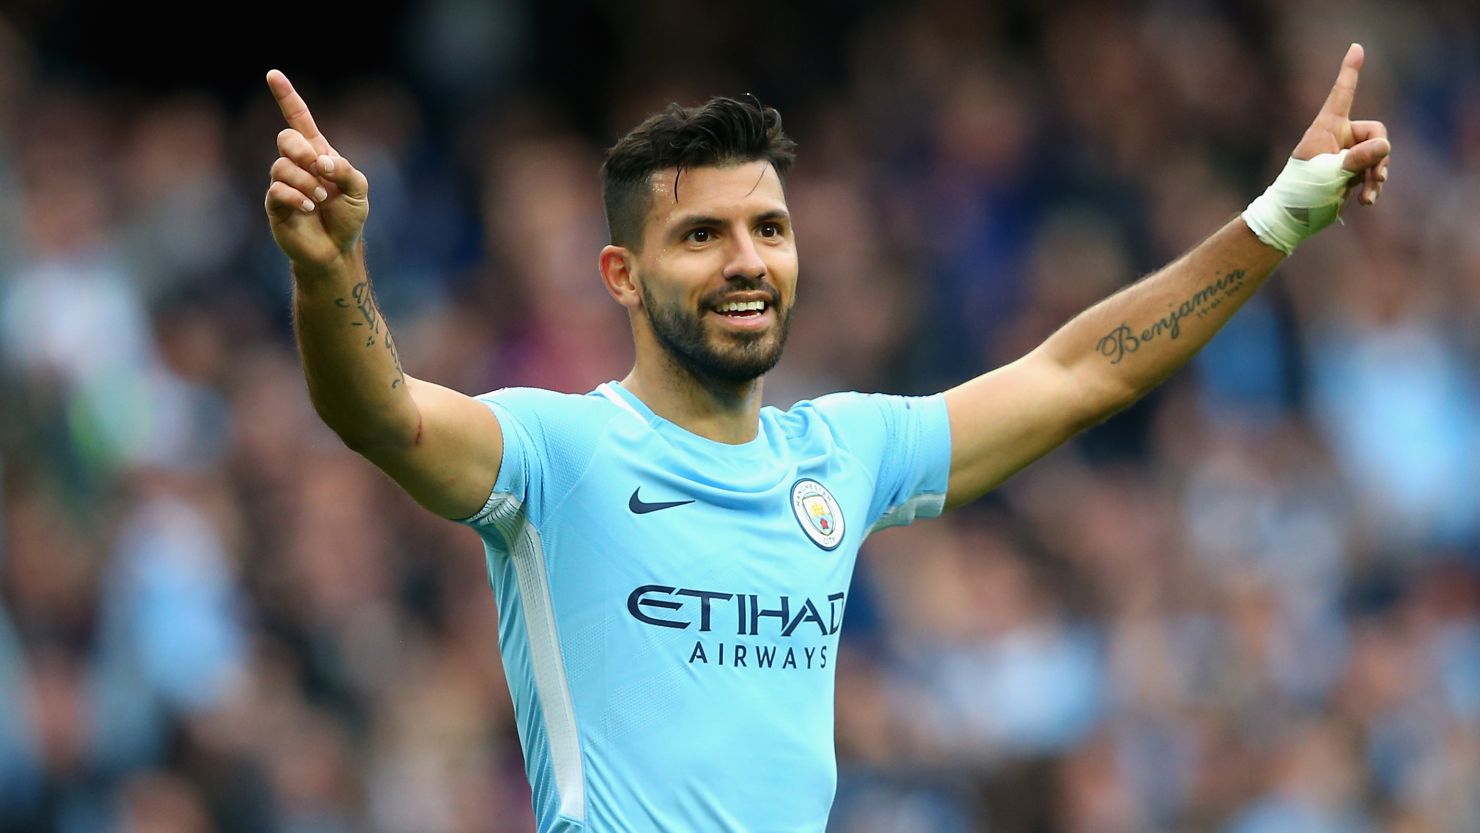 Argentine soccer star Sergio Aguero joined Manchester City in 2011.